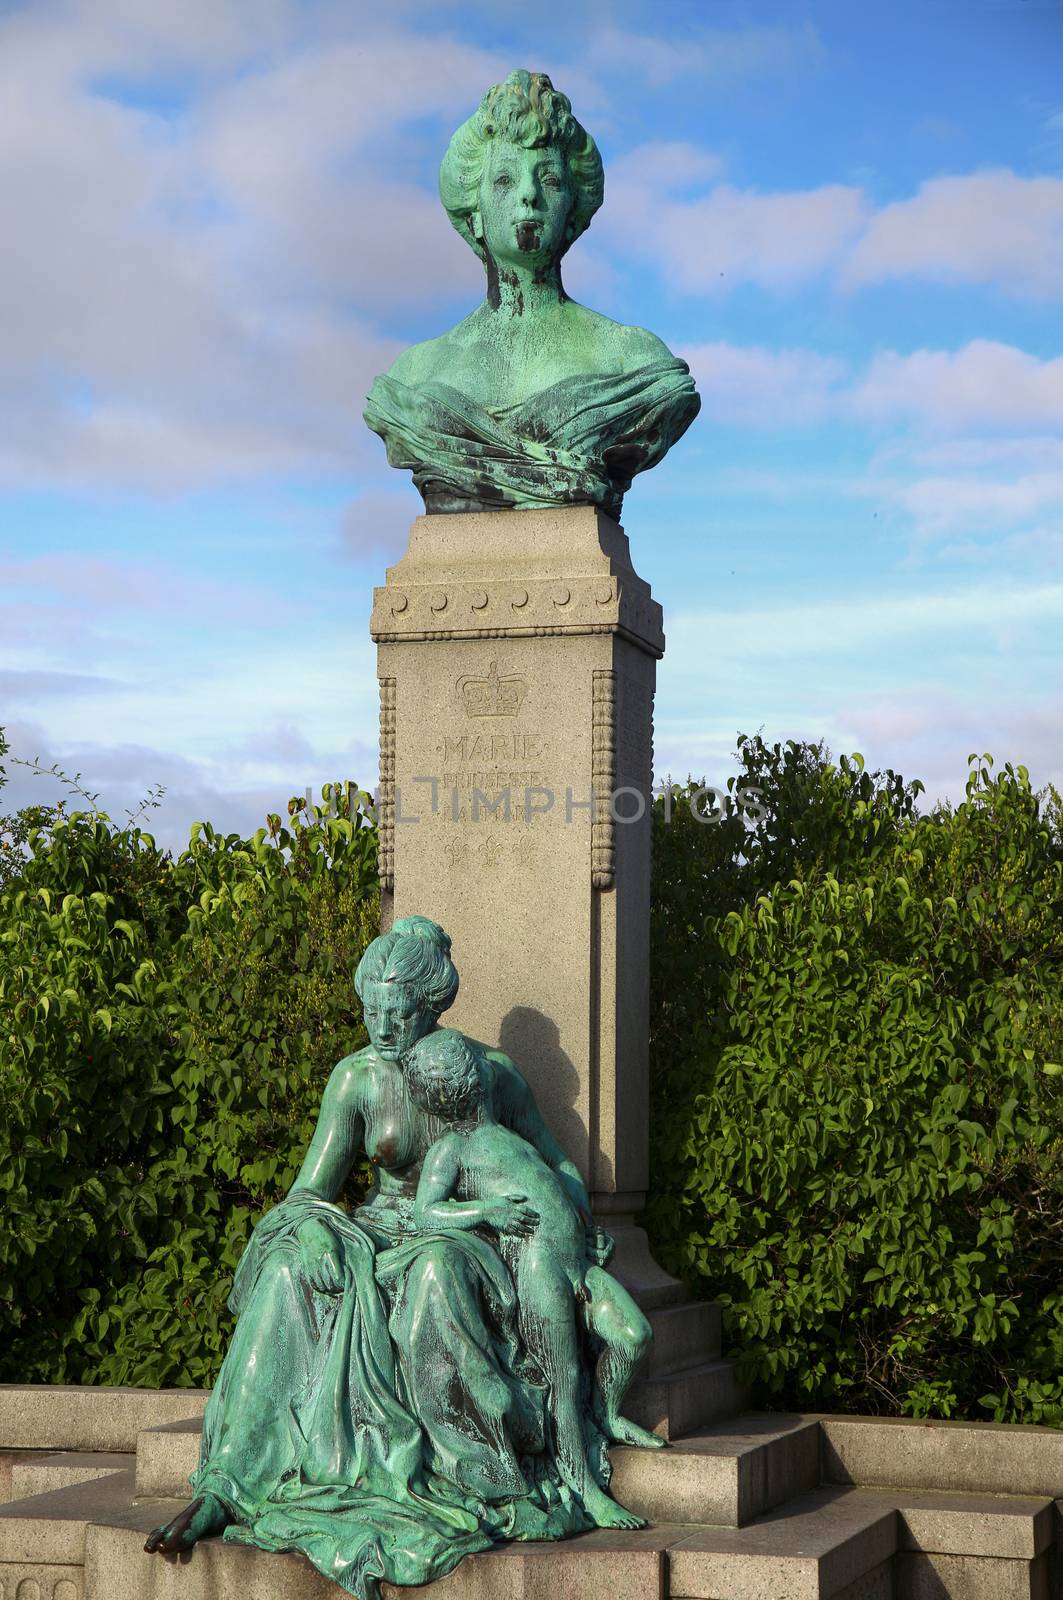 The monument Princess Marie of Orléans at Langelinie in Copenha by vladacanon